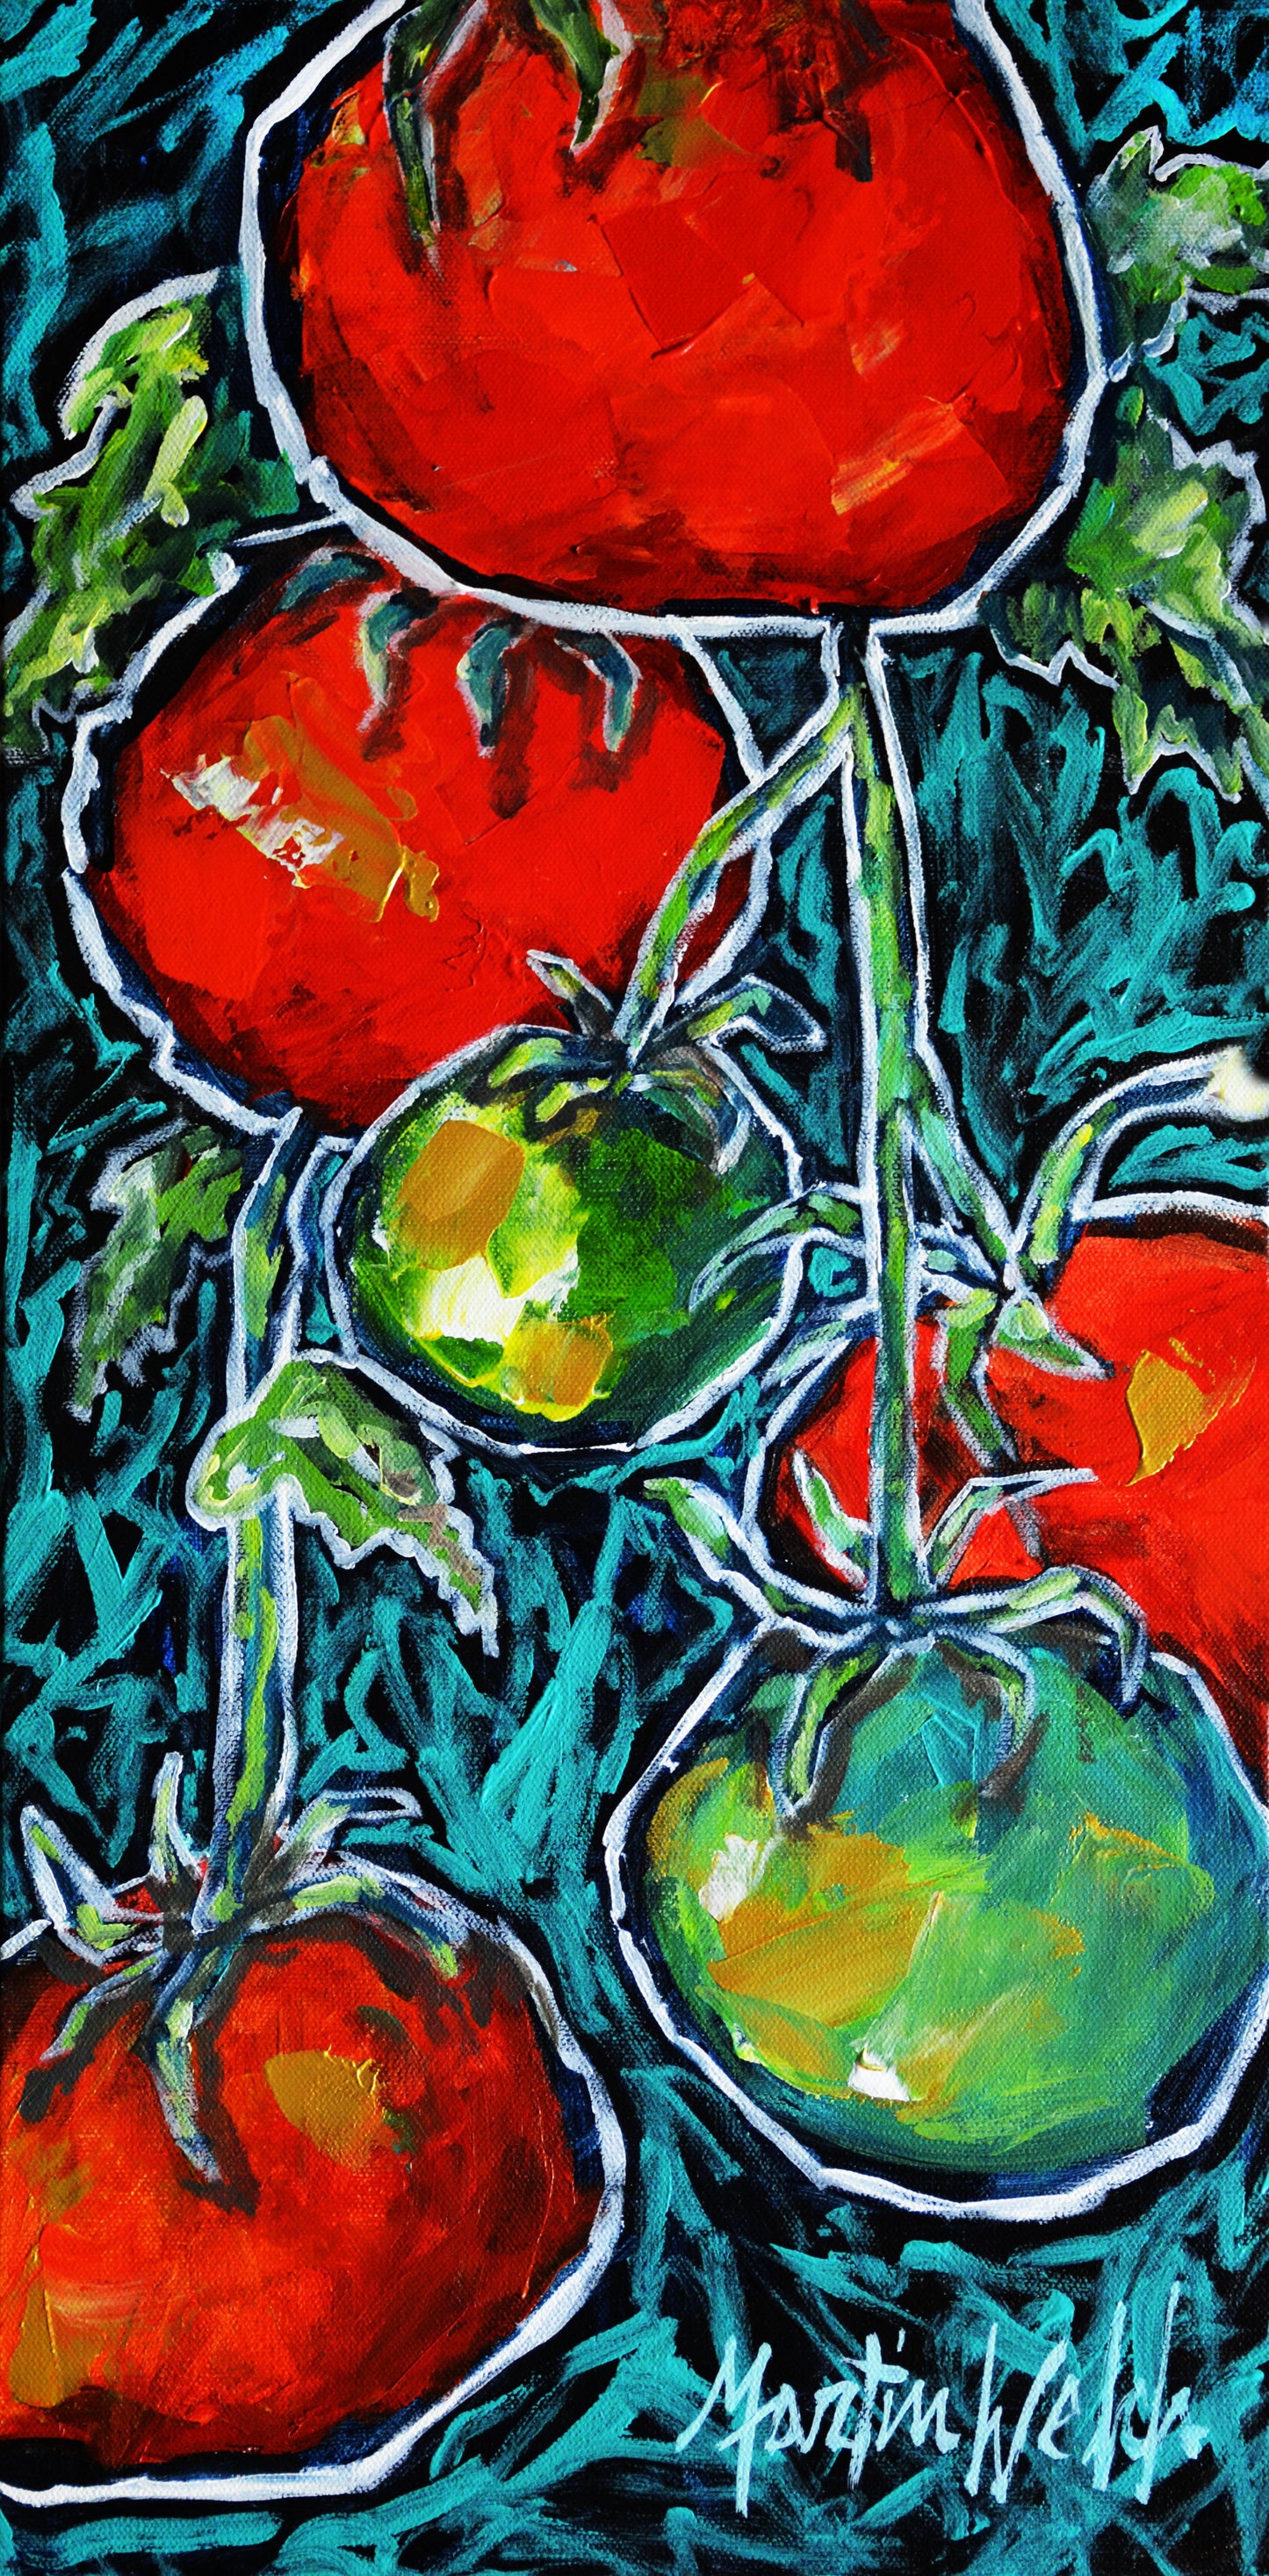 "Maters" Original Painting of tomatoes on vine 12x24